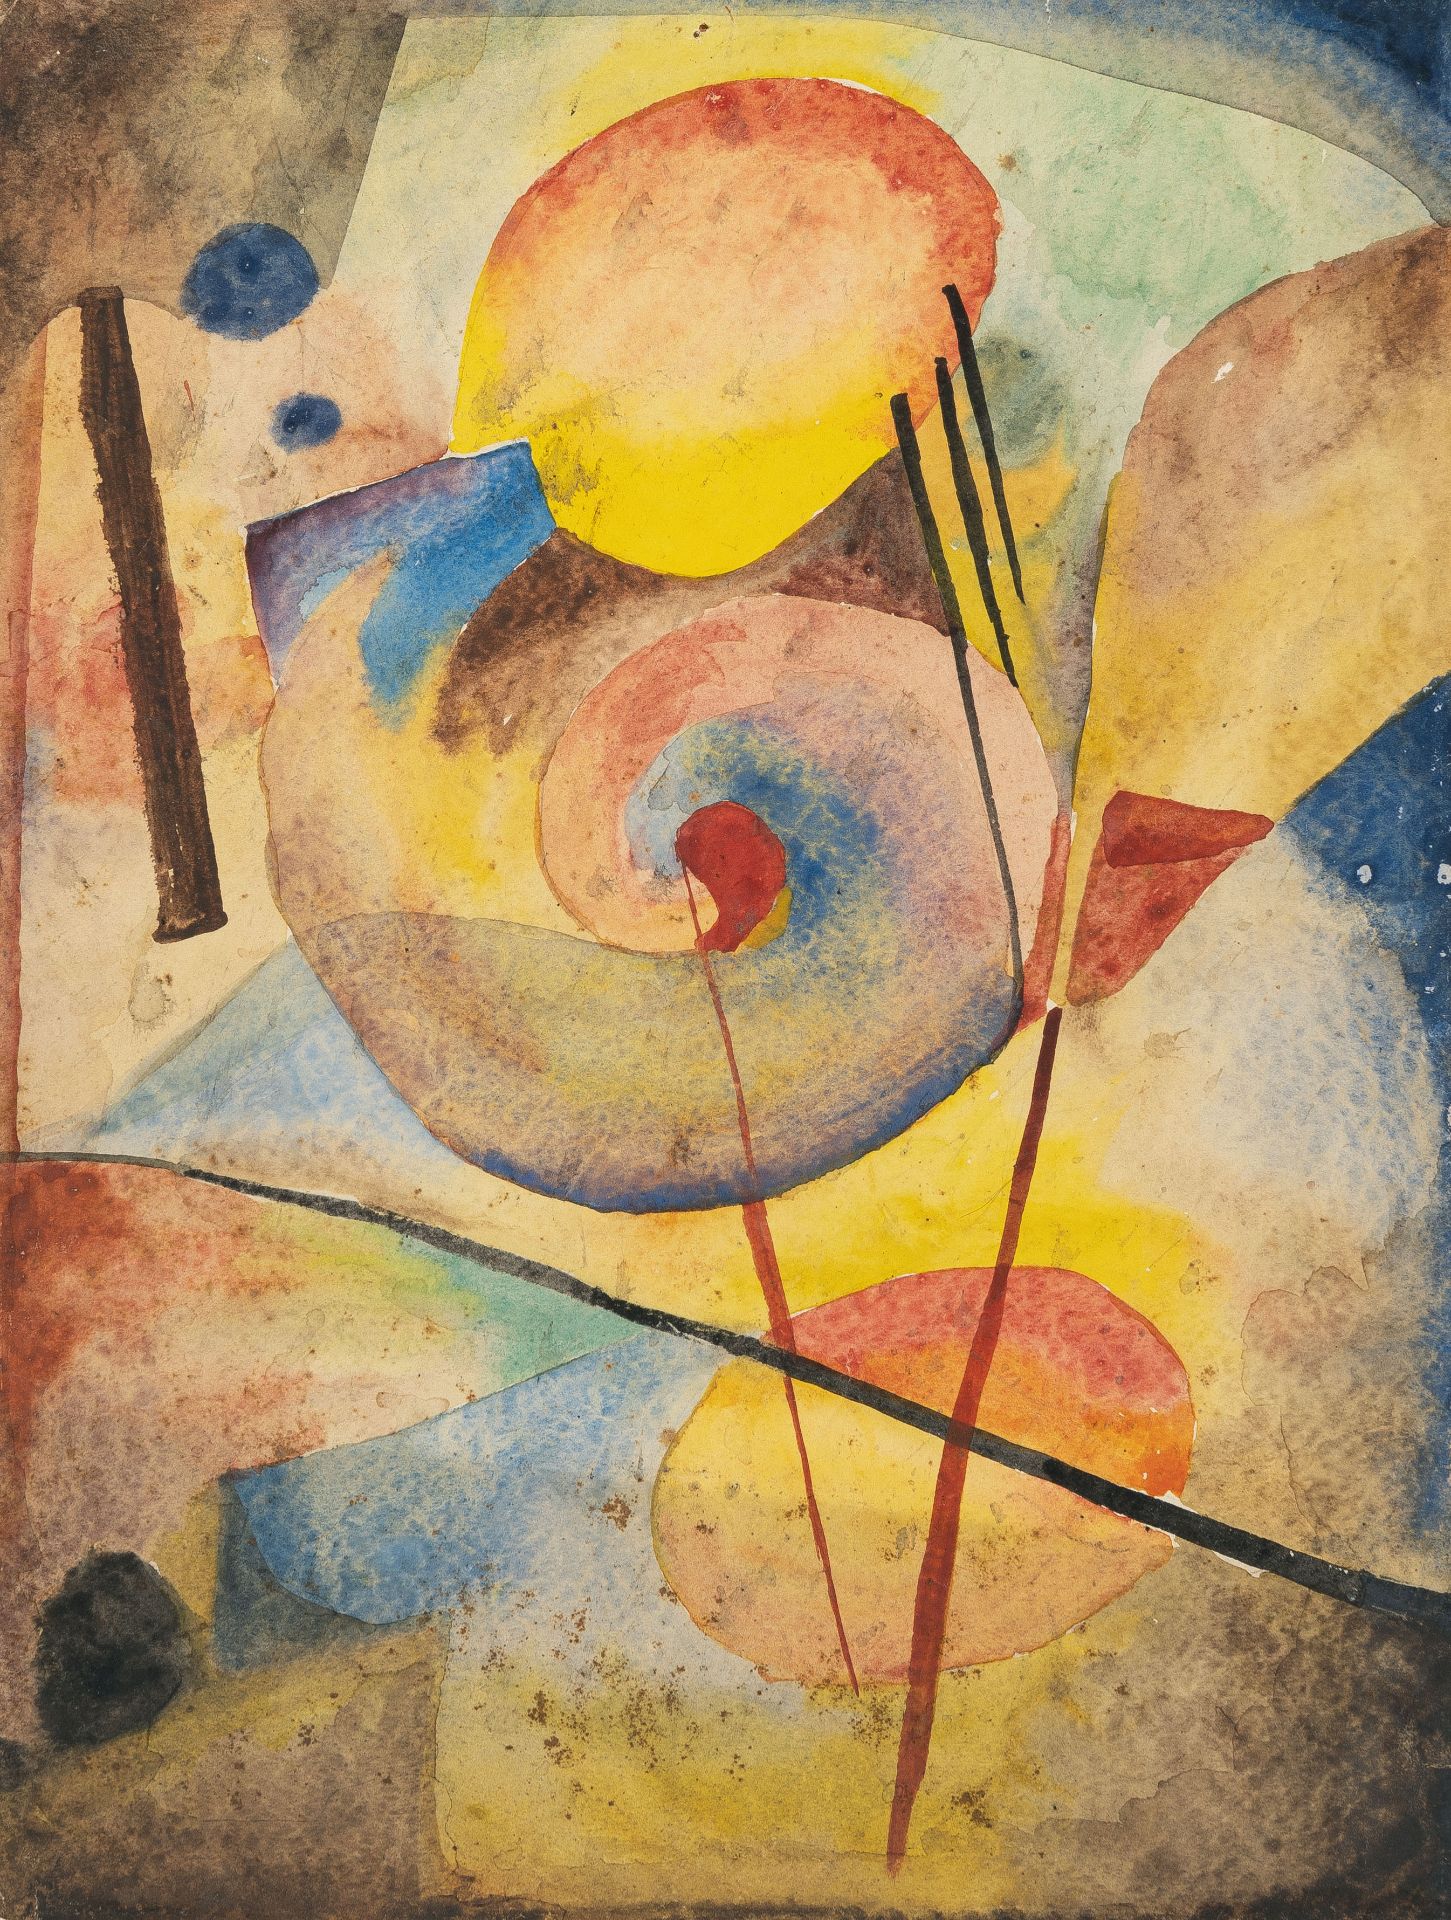 Fritz Stuckenberg, Untitled (Composition).Watercolour on firm, textured wove. (Ca. 1920). Ca. 31.5 x